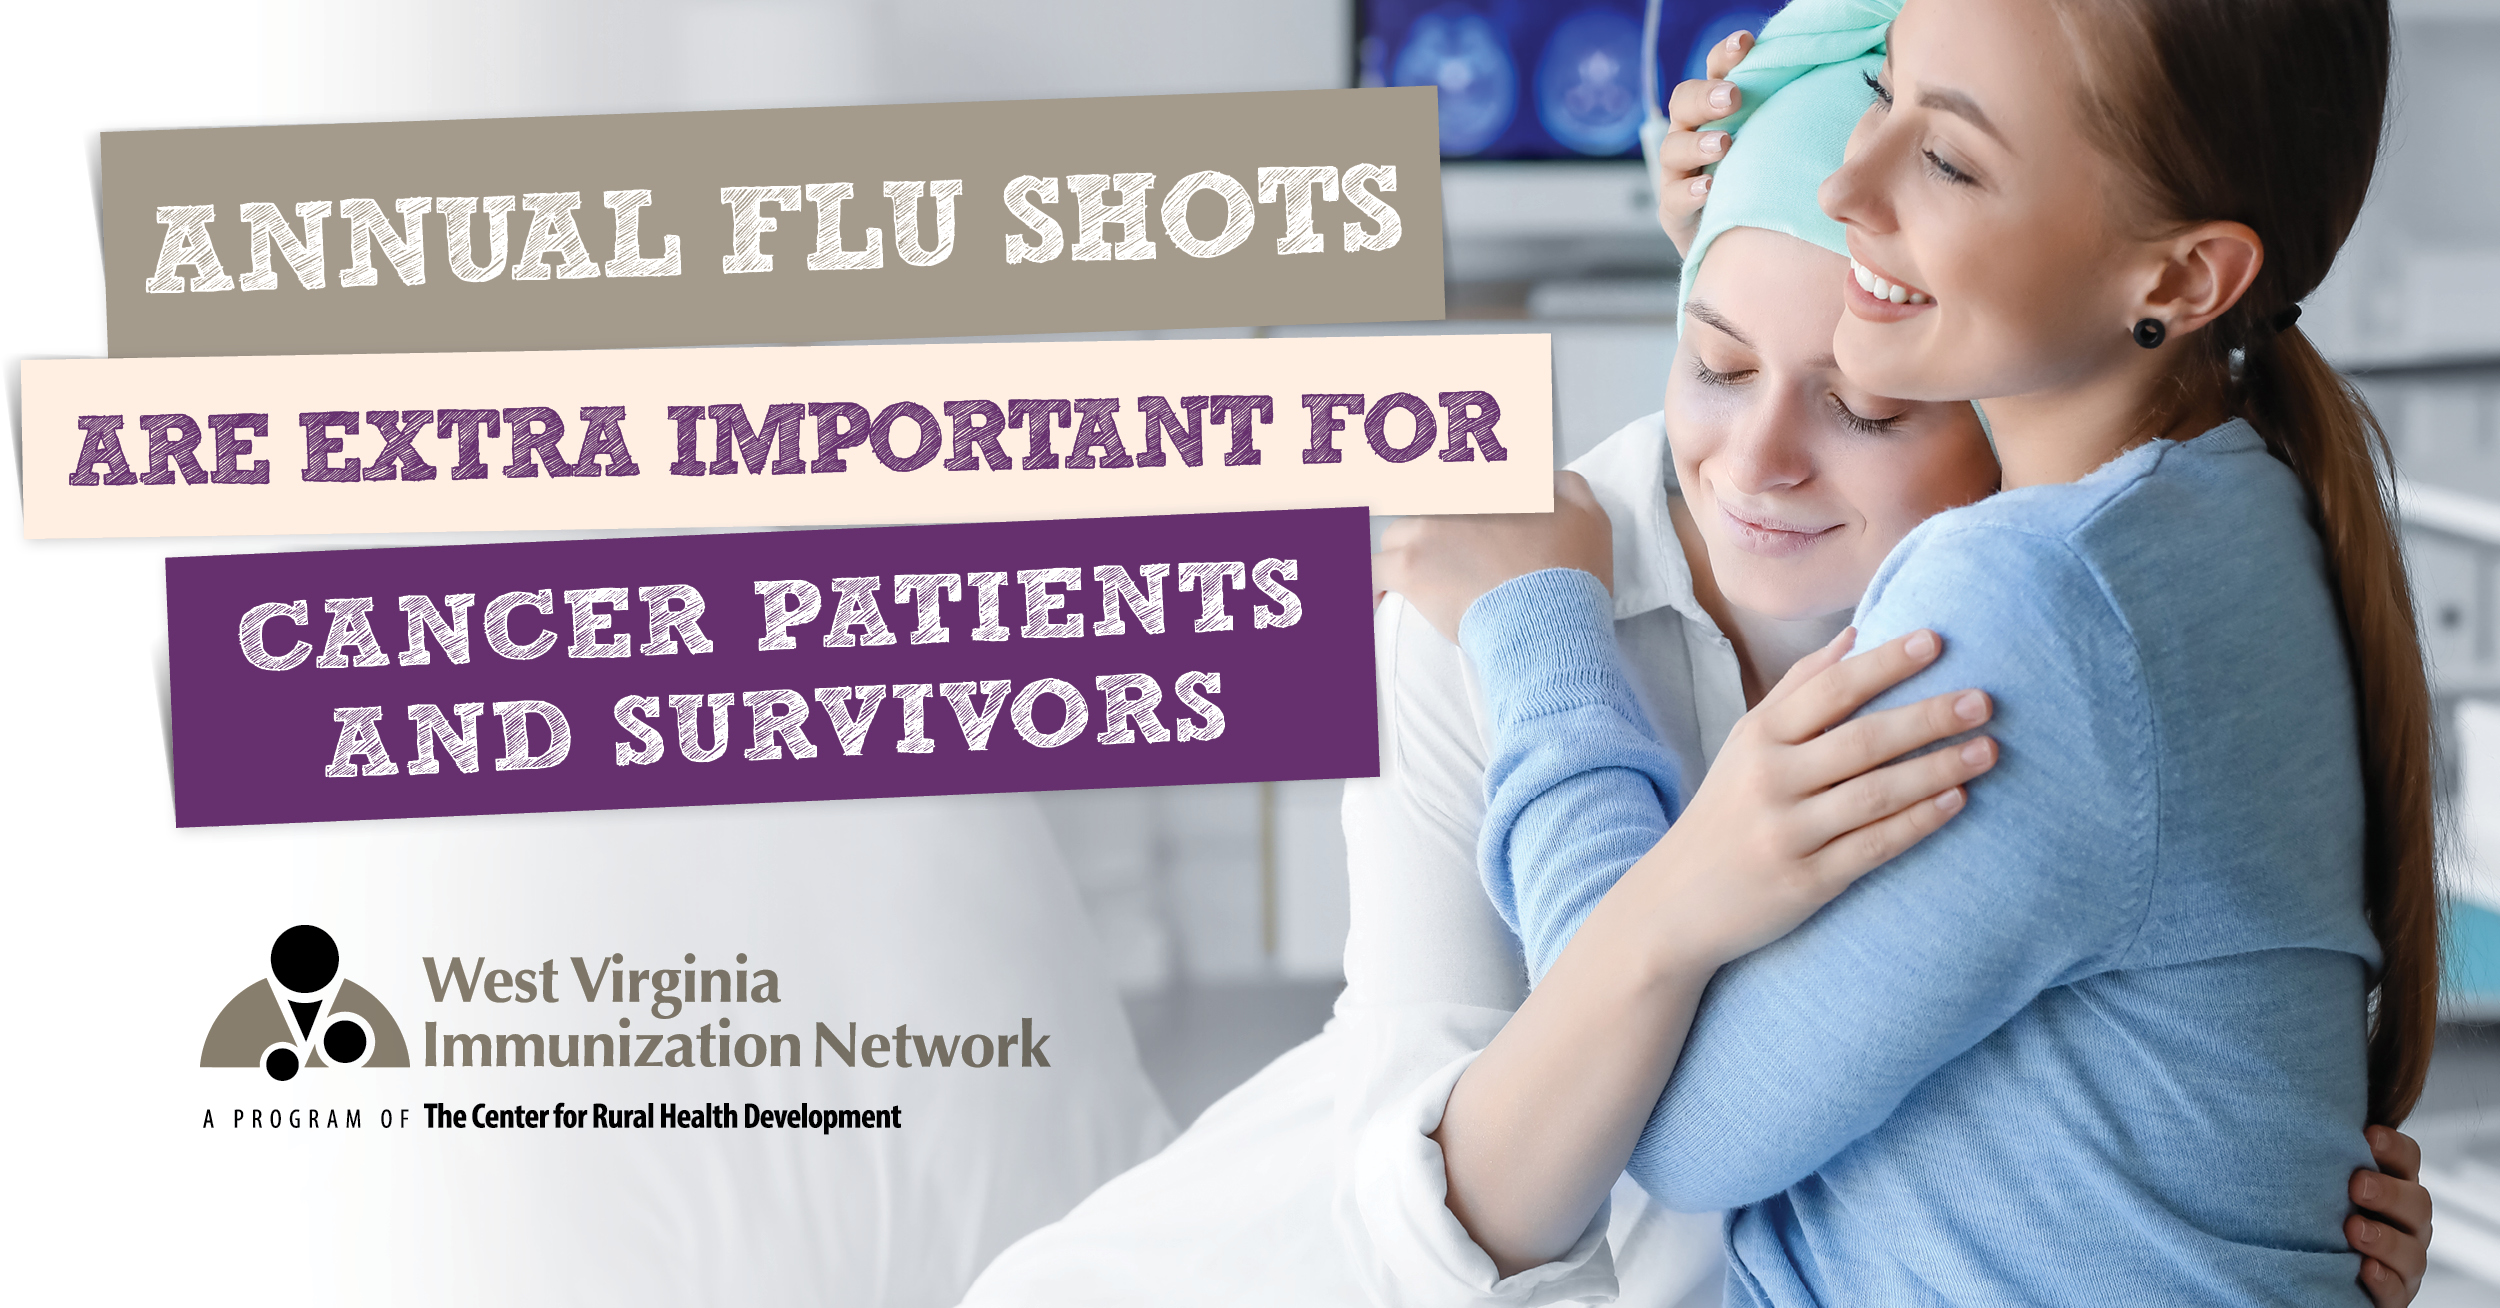 Annual Flu Shots Are Extra Important for Cancer Patients and Survivors